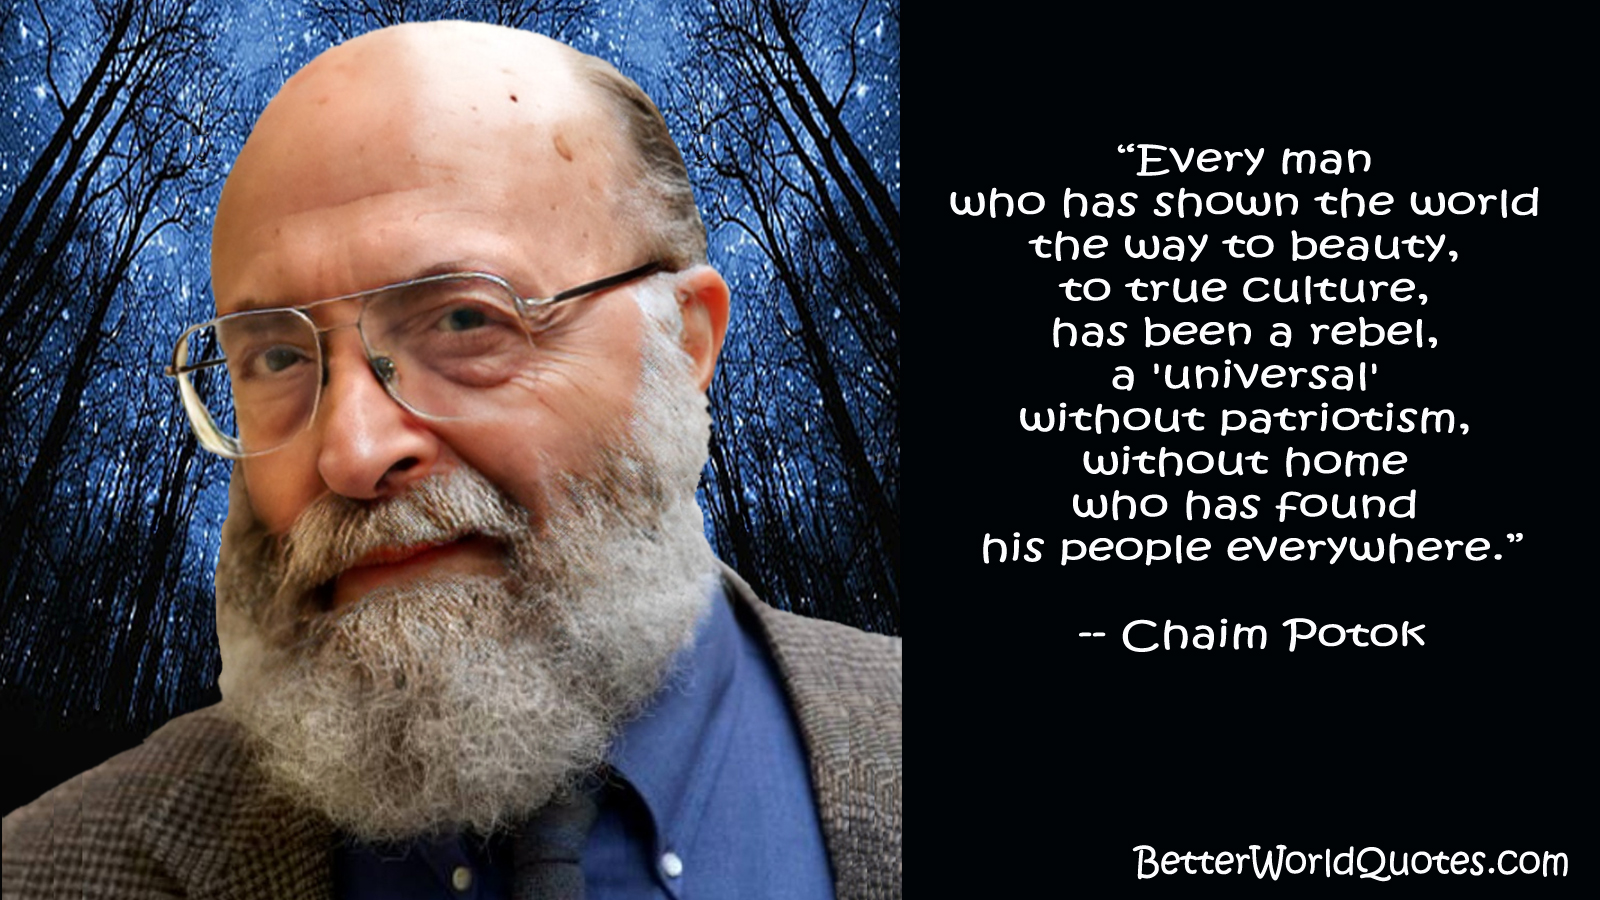 Chaim Potok: Every man who has shown the world the way to beauty, to true culture, has been a rebel, a 'universal' without patriotism, without home who has found his people everywhere.